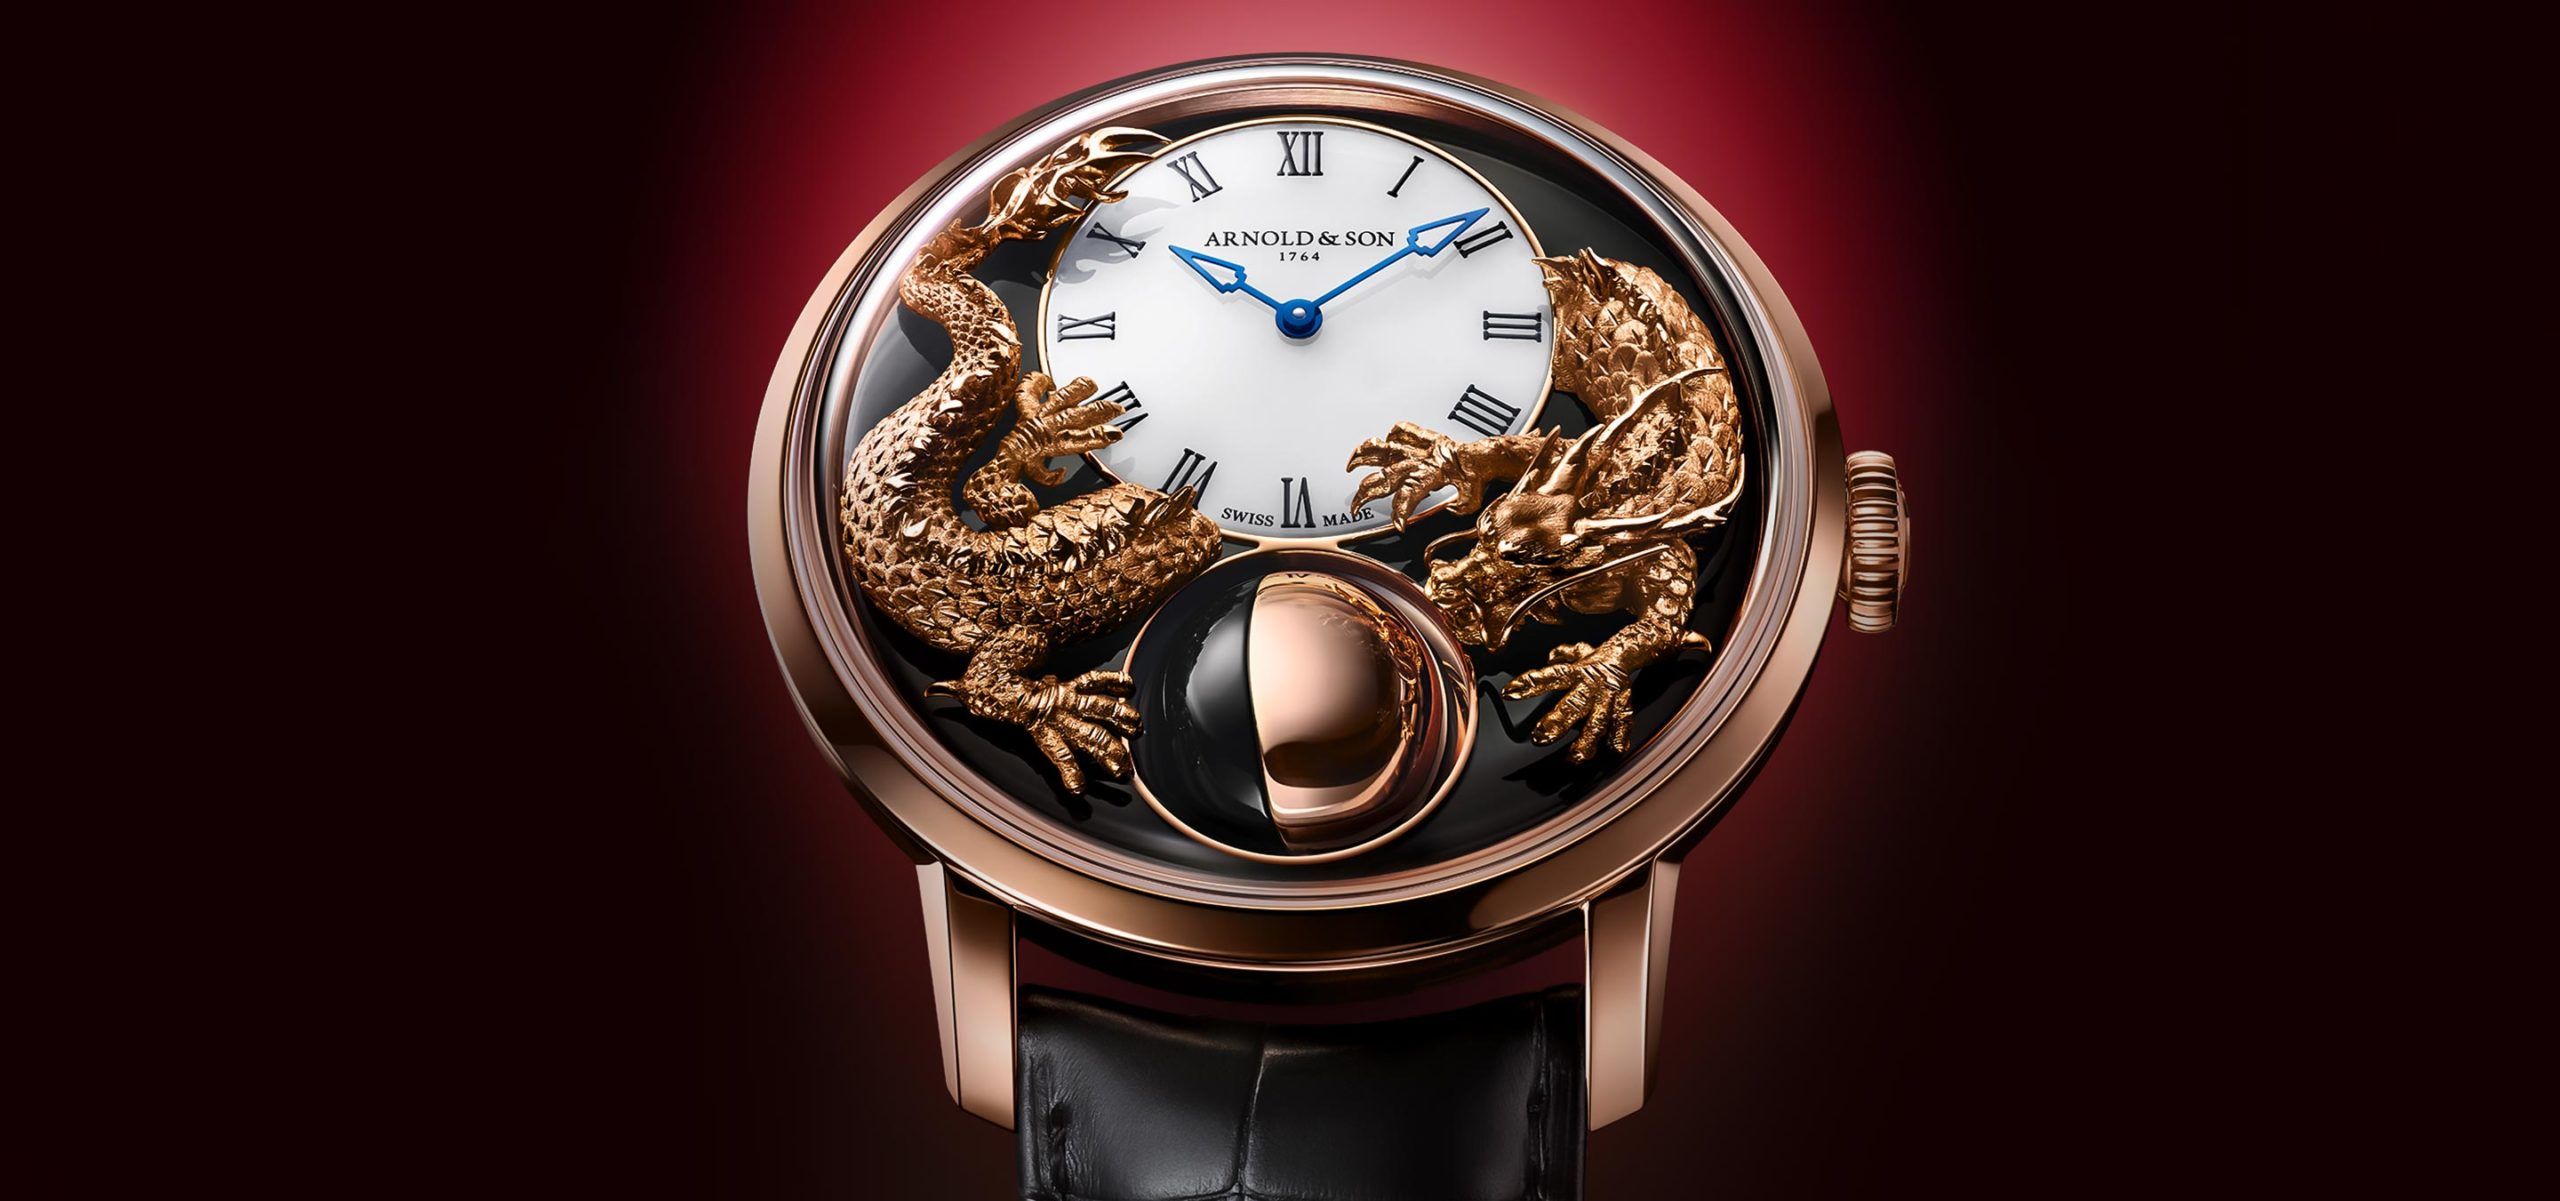 Golden Dragons Who Drank The Moon: Introducing Arnold & Son’s Tributes To The Year Of The Dragon